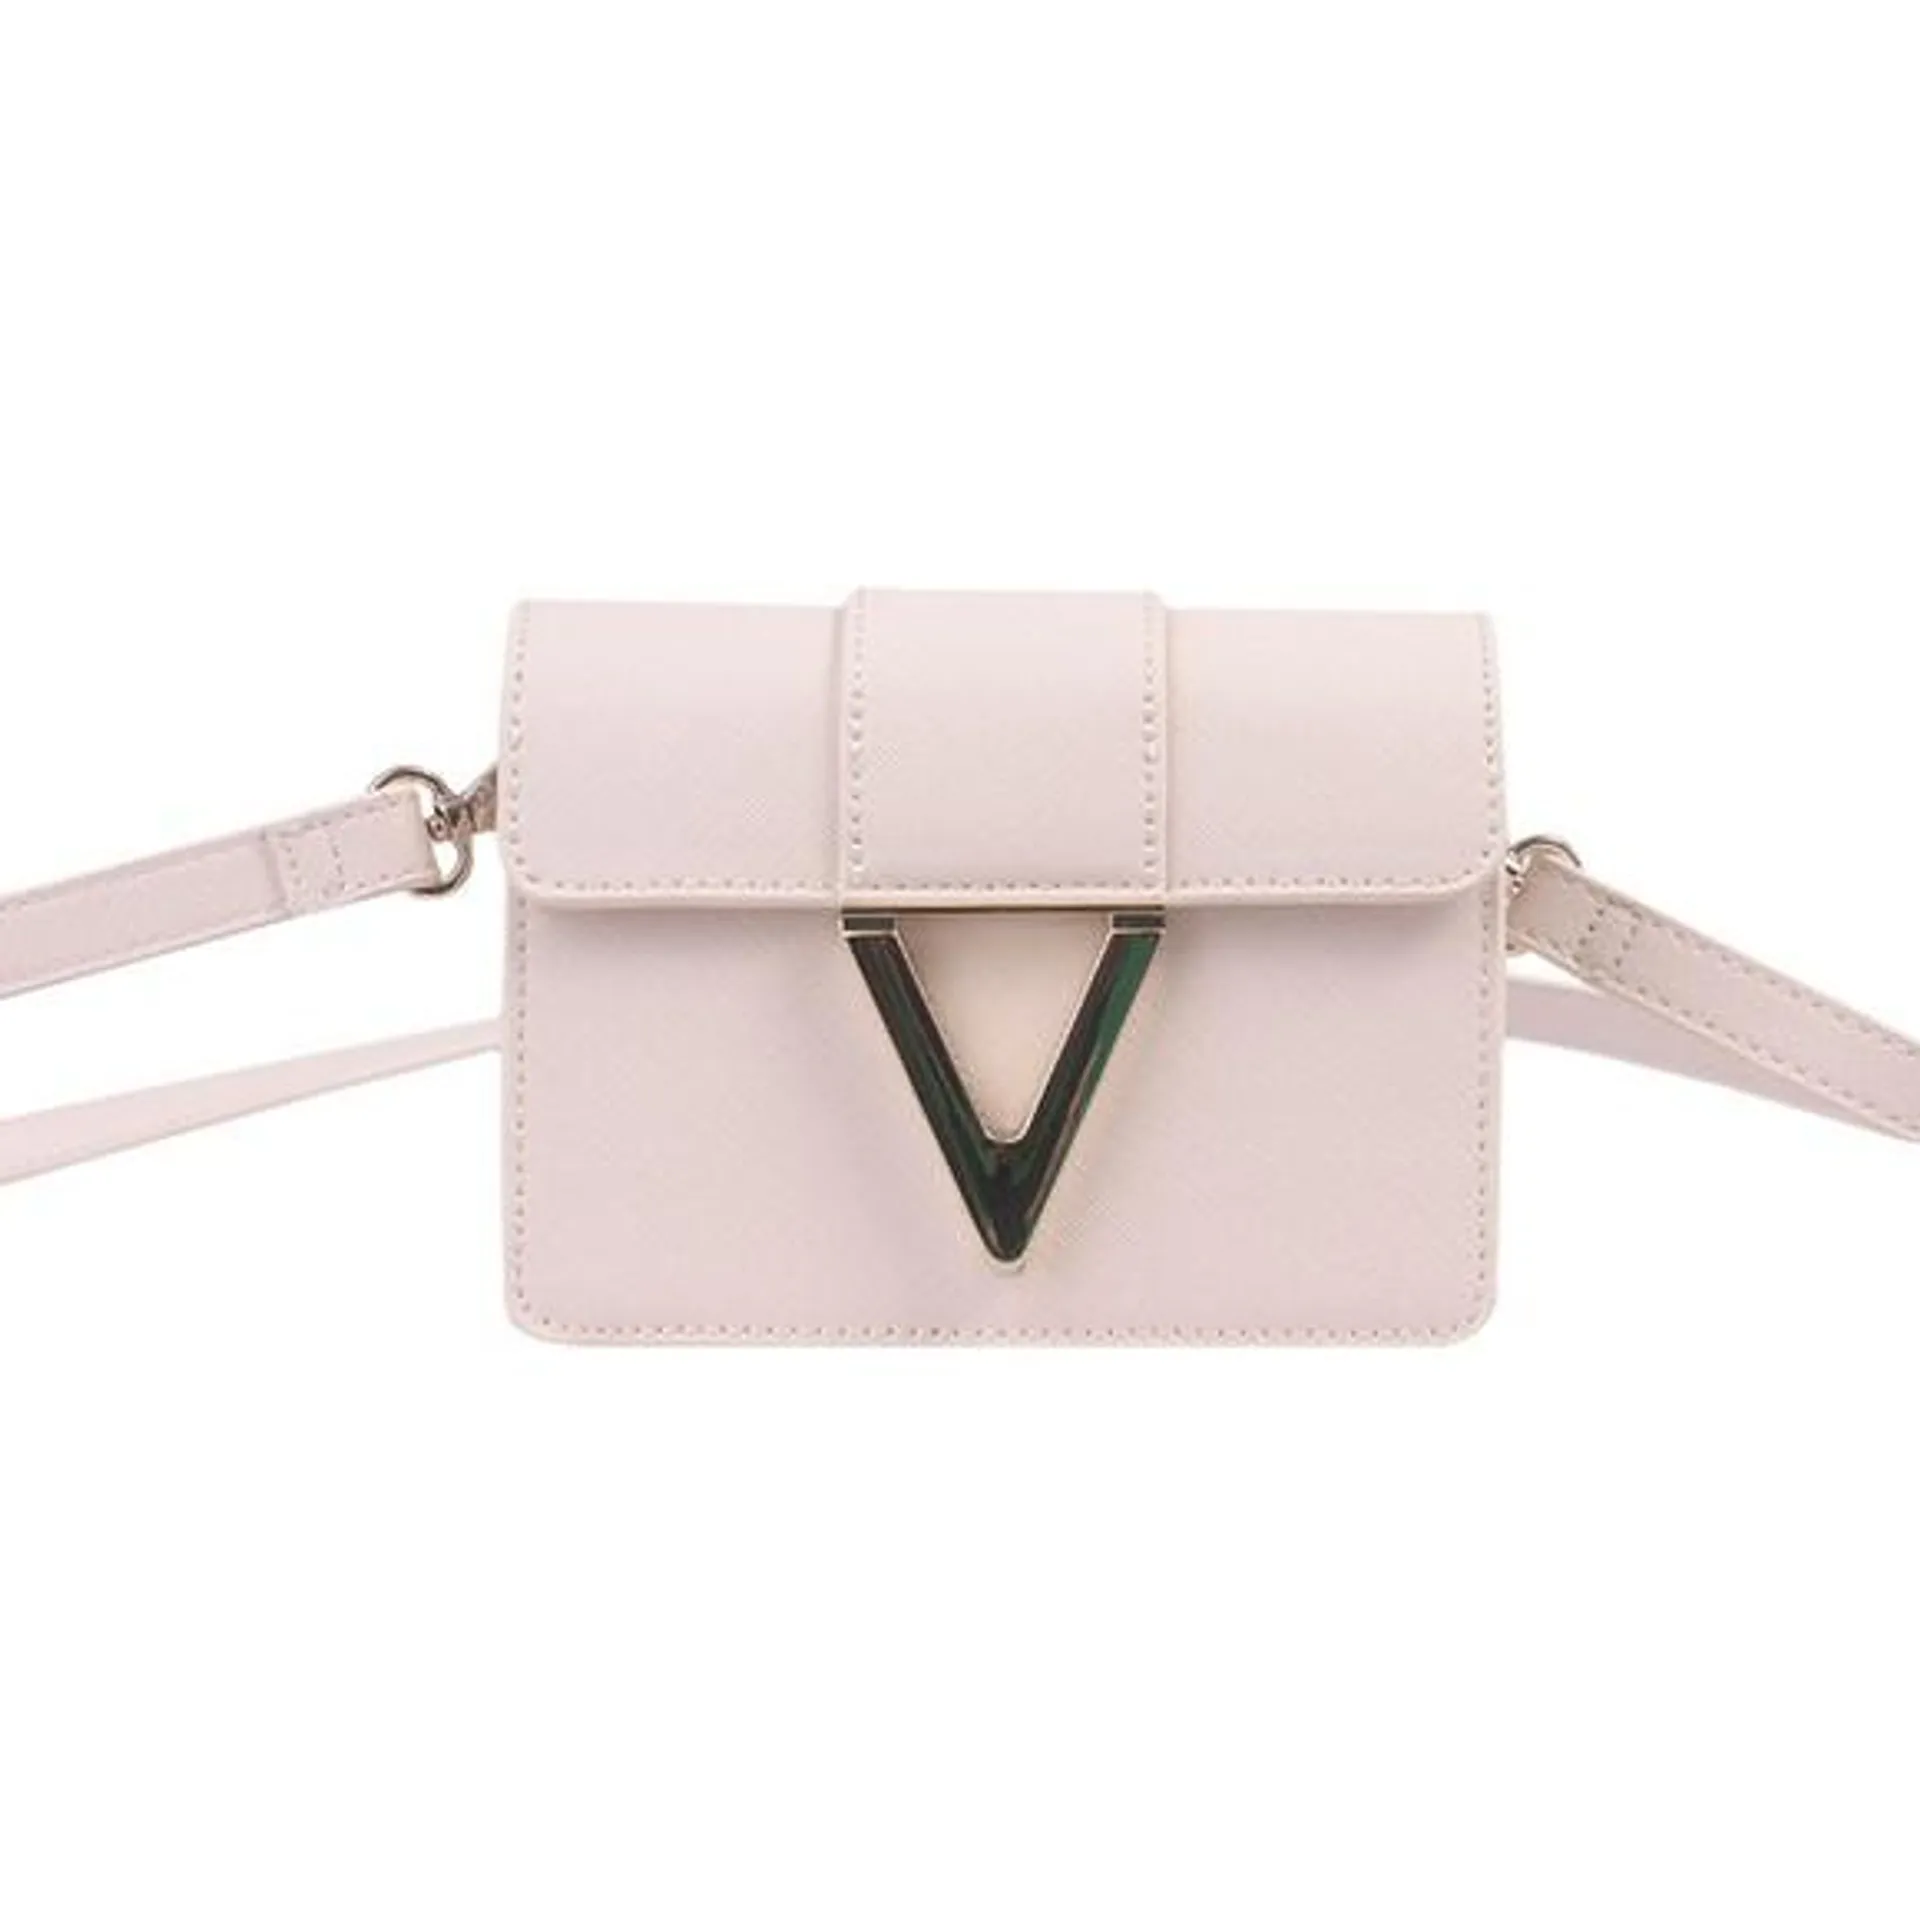 Voyage Re Small Flap Bag